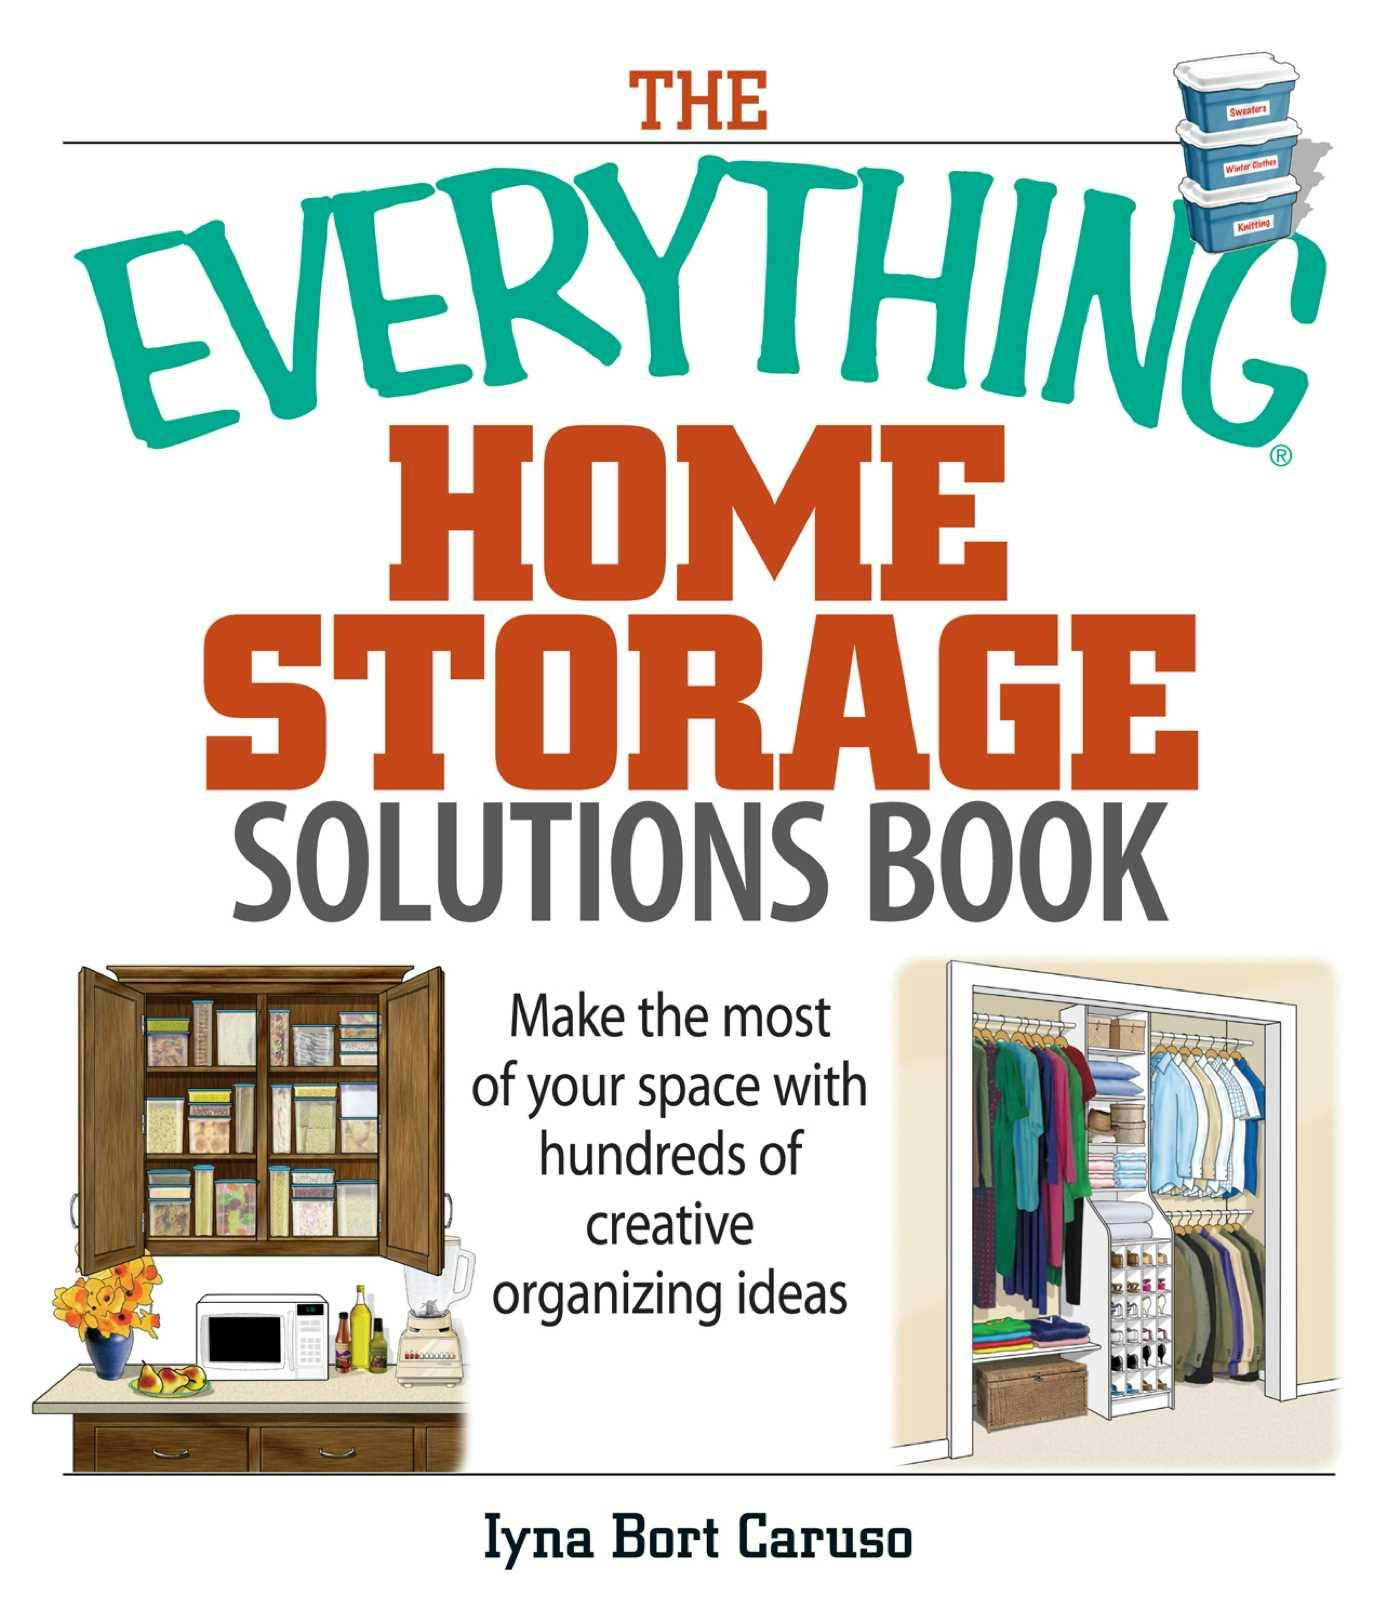 The Everything Home Storage Solutions Book: Make the Most of Your Space With Hundreds of Creative Organizing Ideas - Iyna Bort Caruso